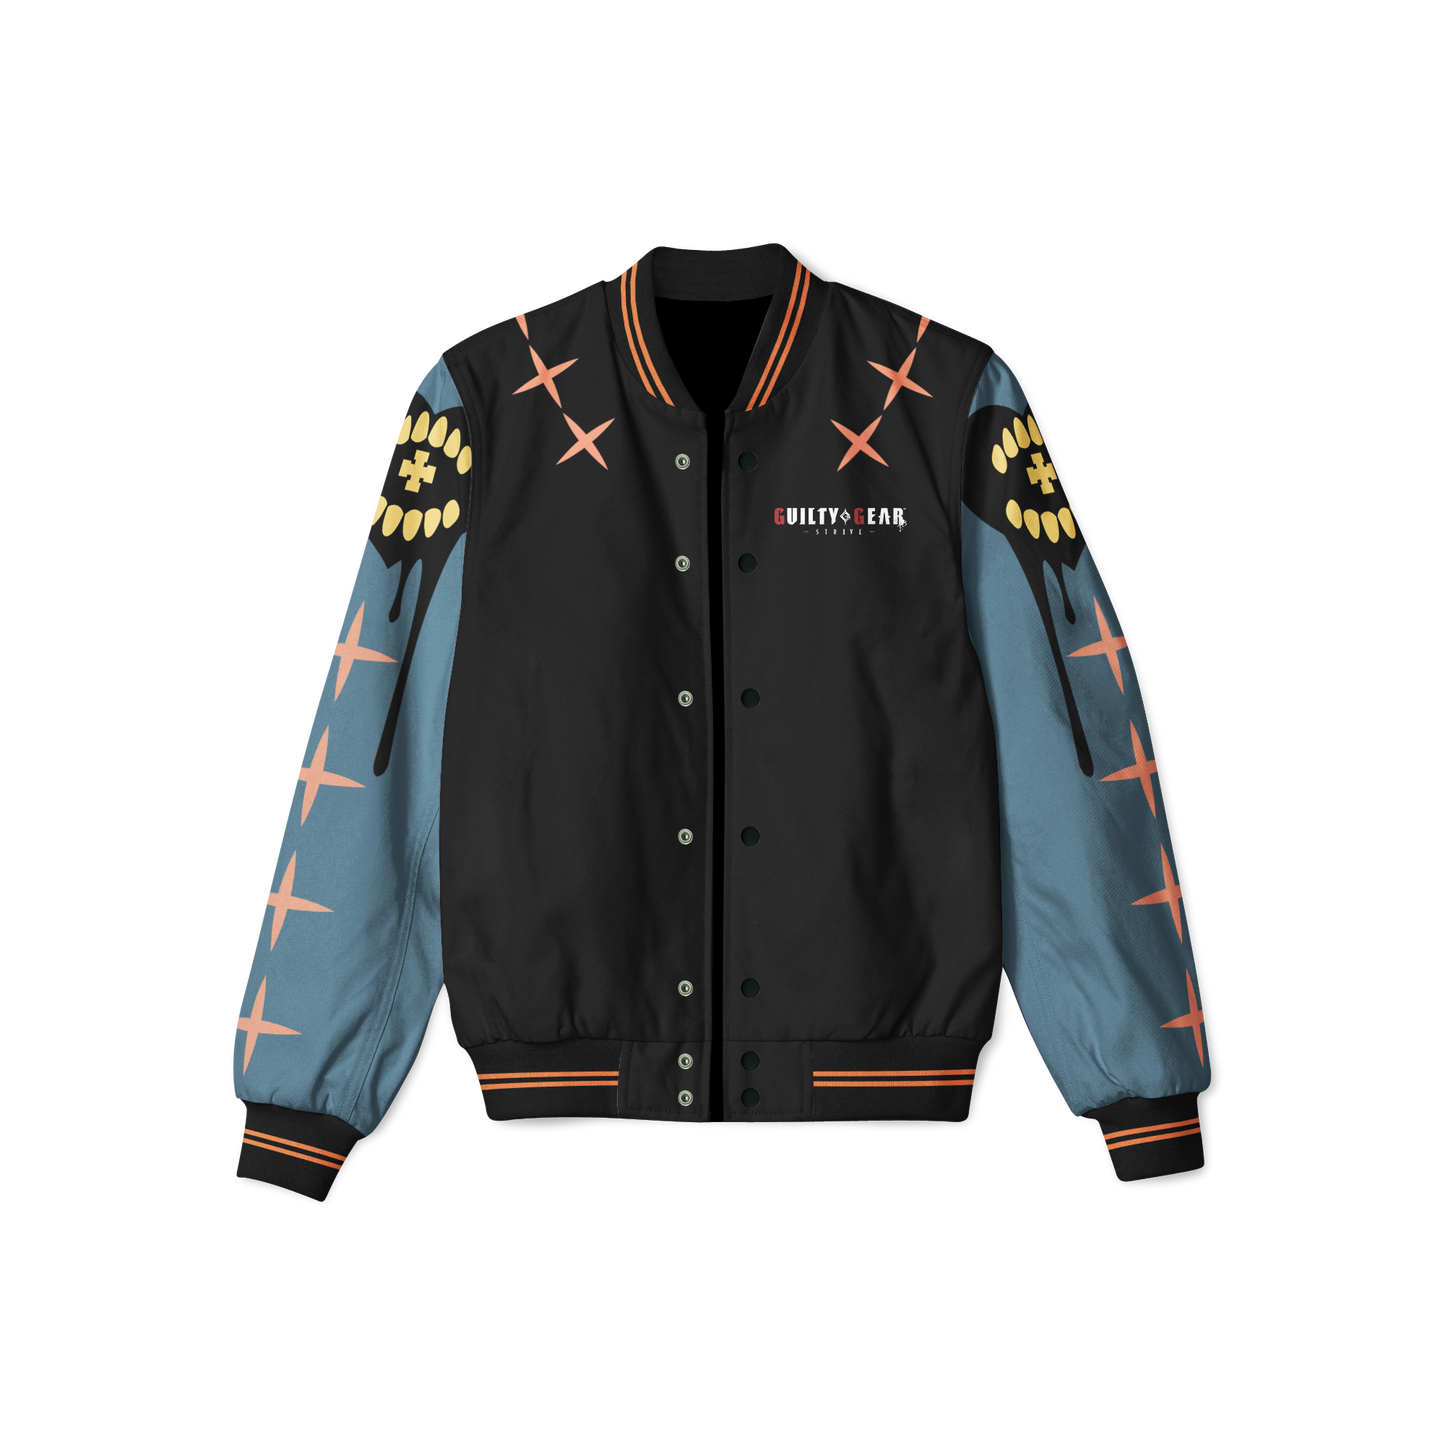 GUILTY GEAR STRIVE HAPPY CHAOS LIGHTWEIGHT BOMBER (PRE ORDER)